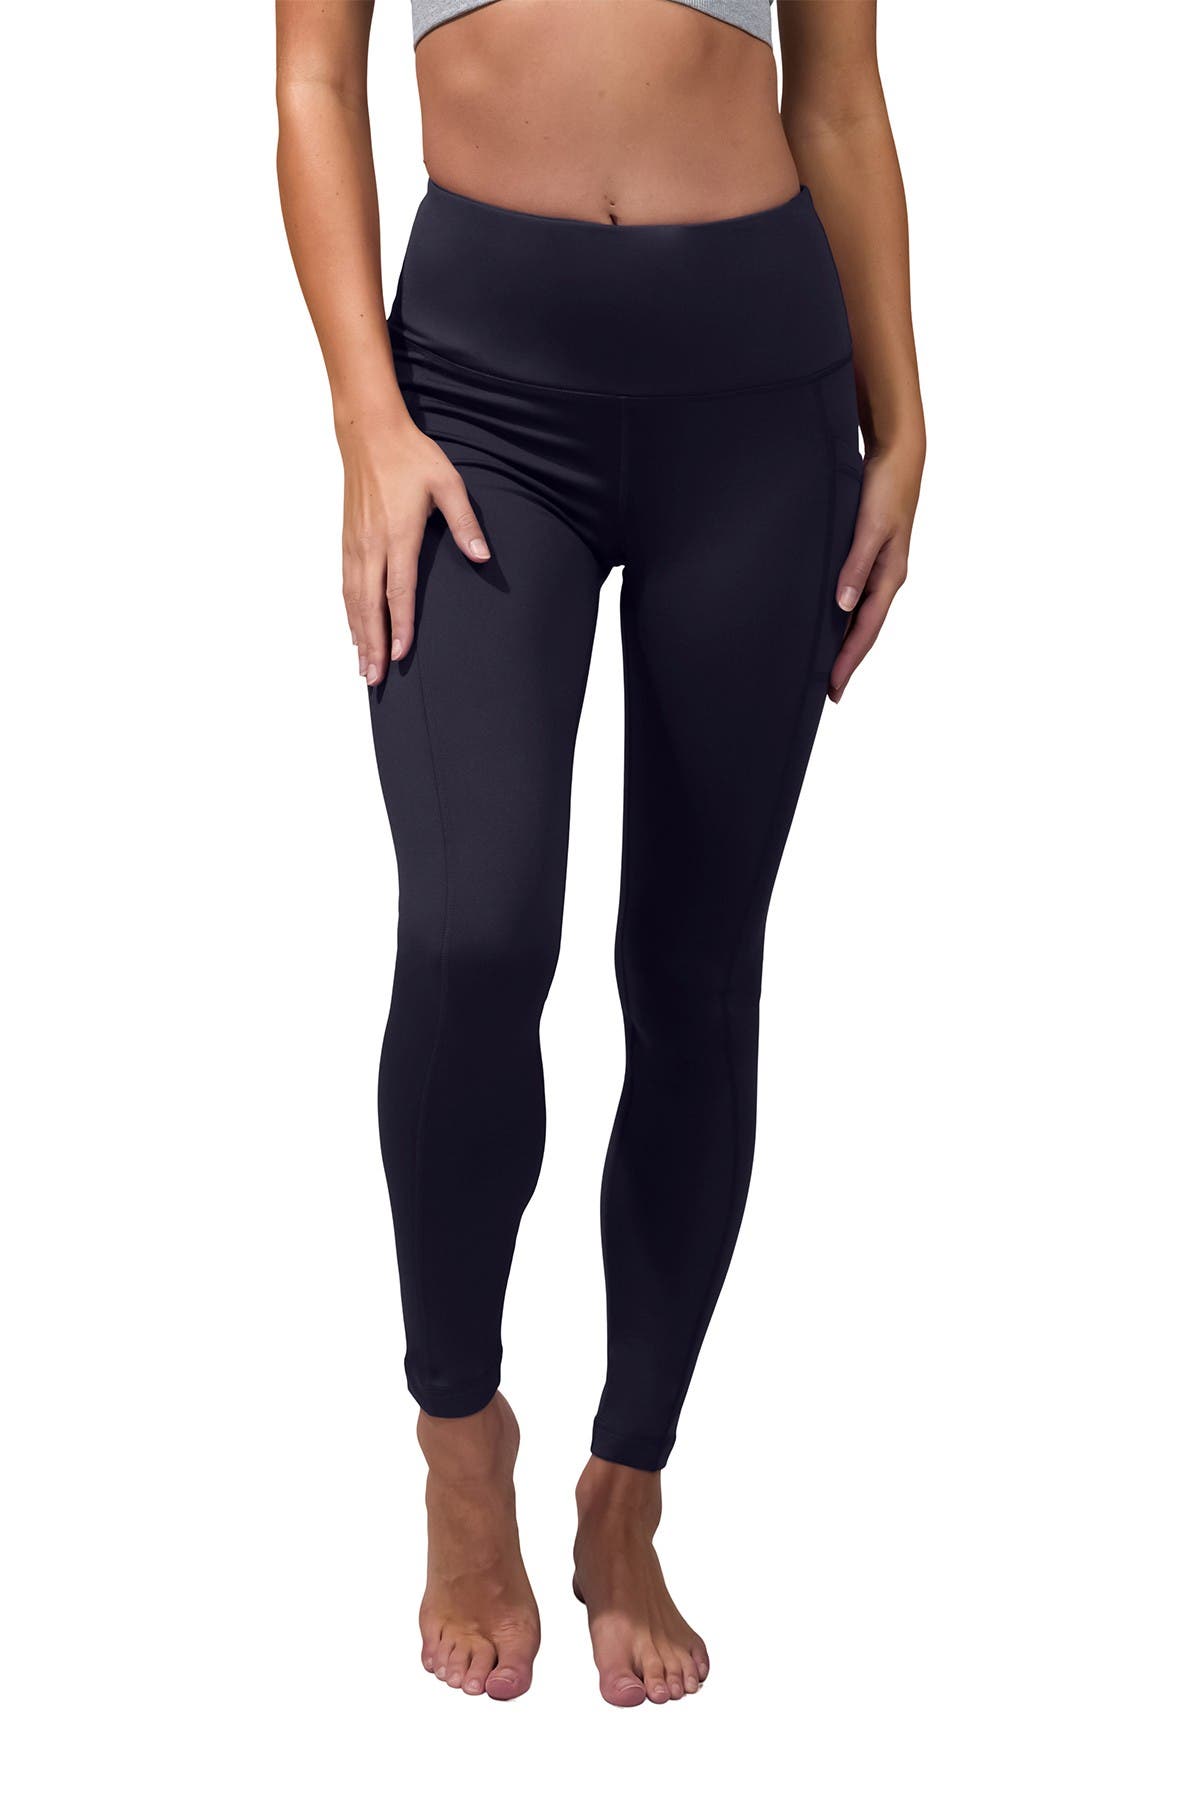 90 Degree by Reflex Legging Color- Gothic Grape for sale online